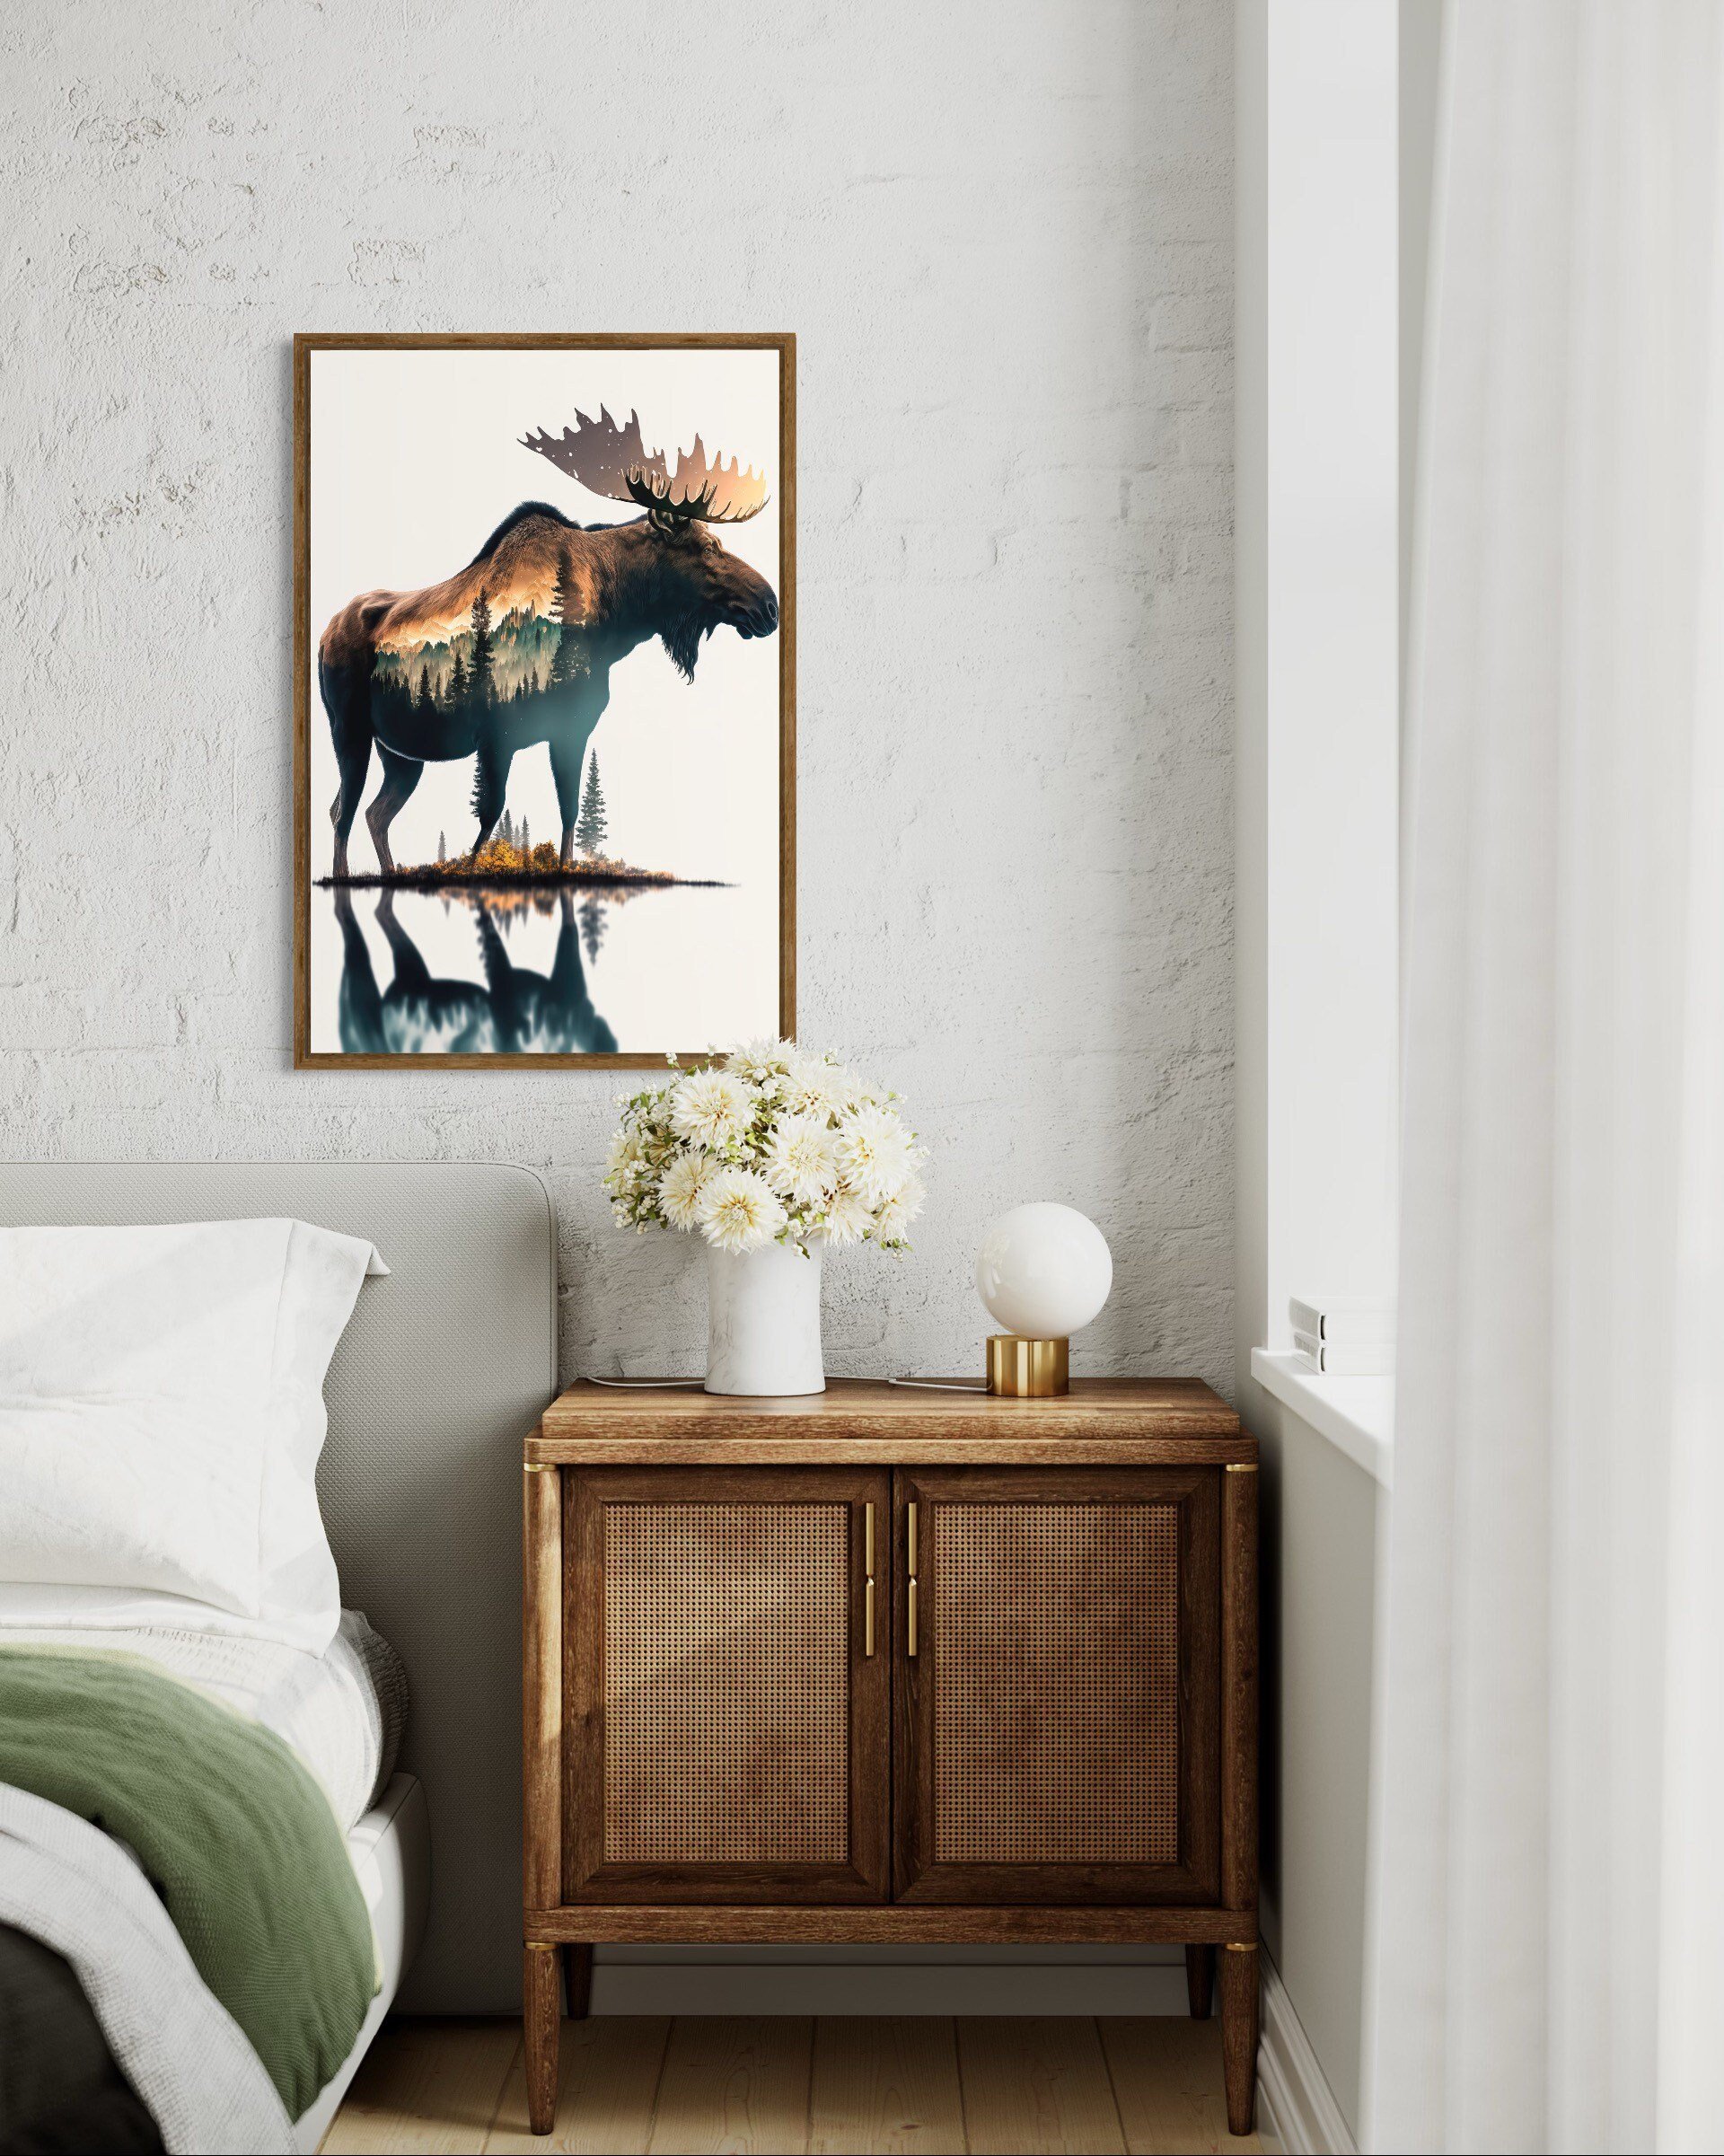 Wandering Moose | Double Exposure Art Nature Decor Modern Wall Canvas Prints Metal Painting Cabin